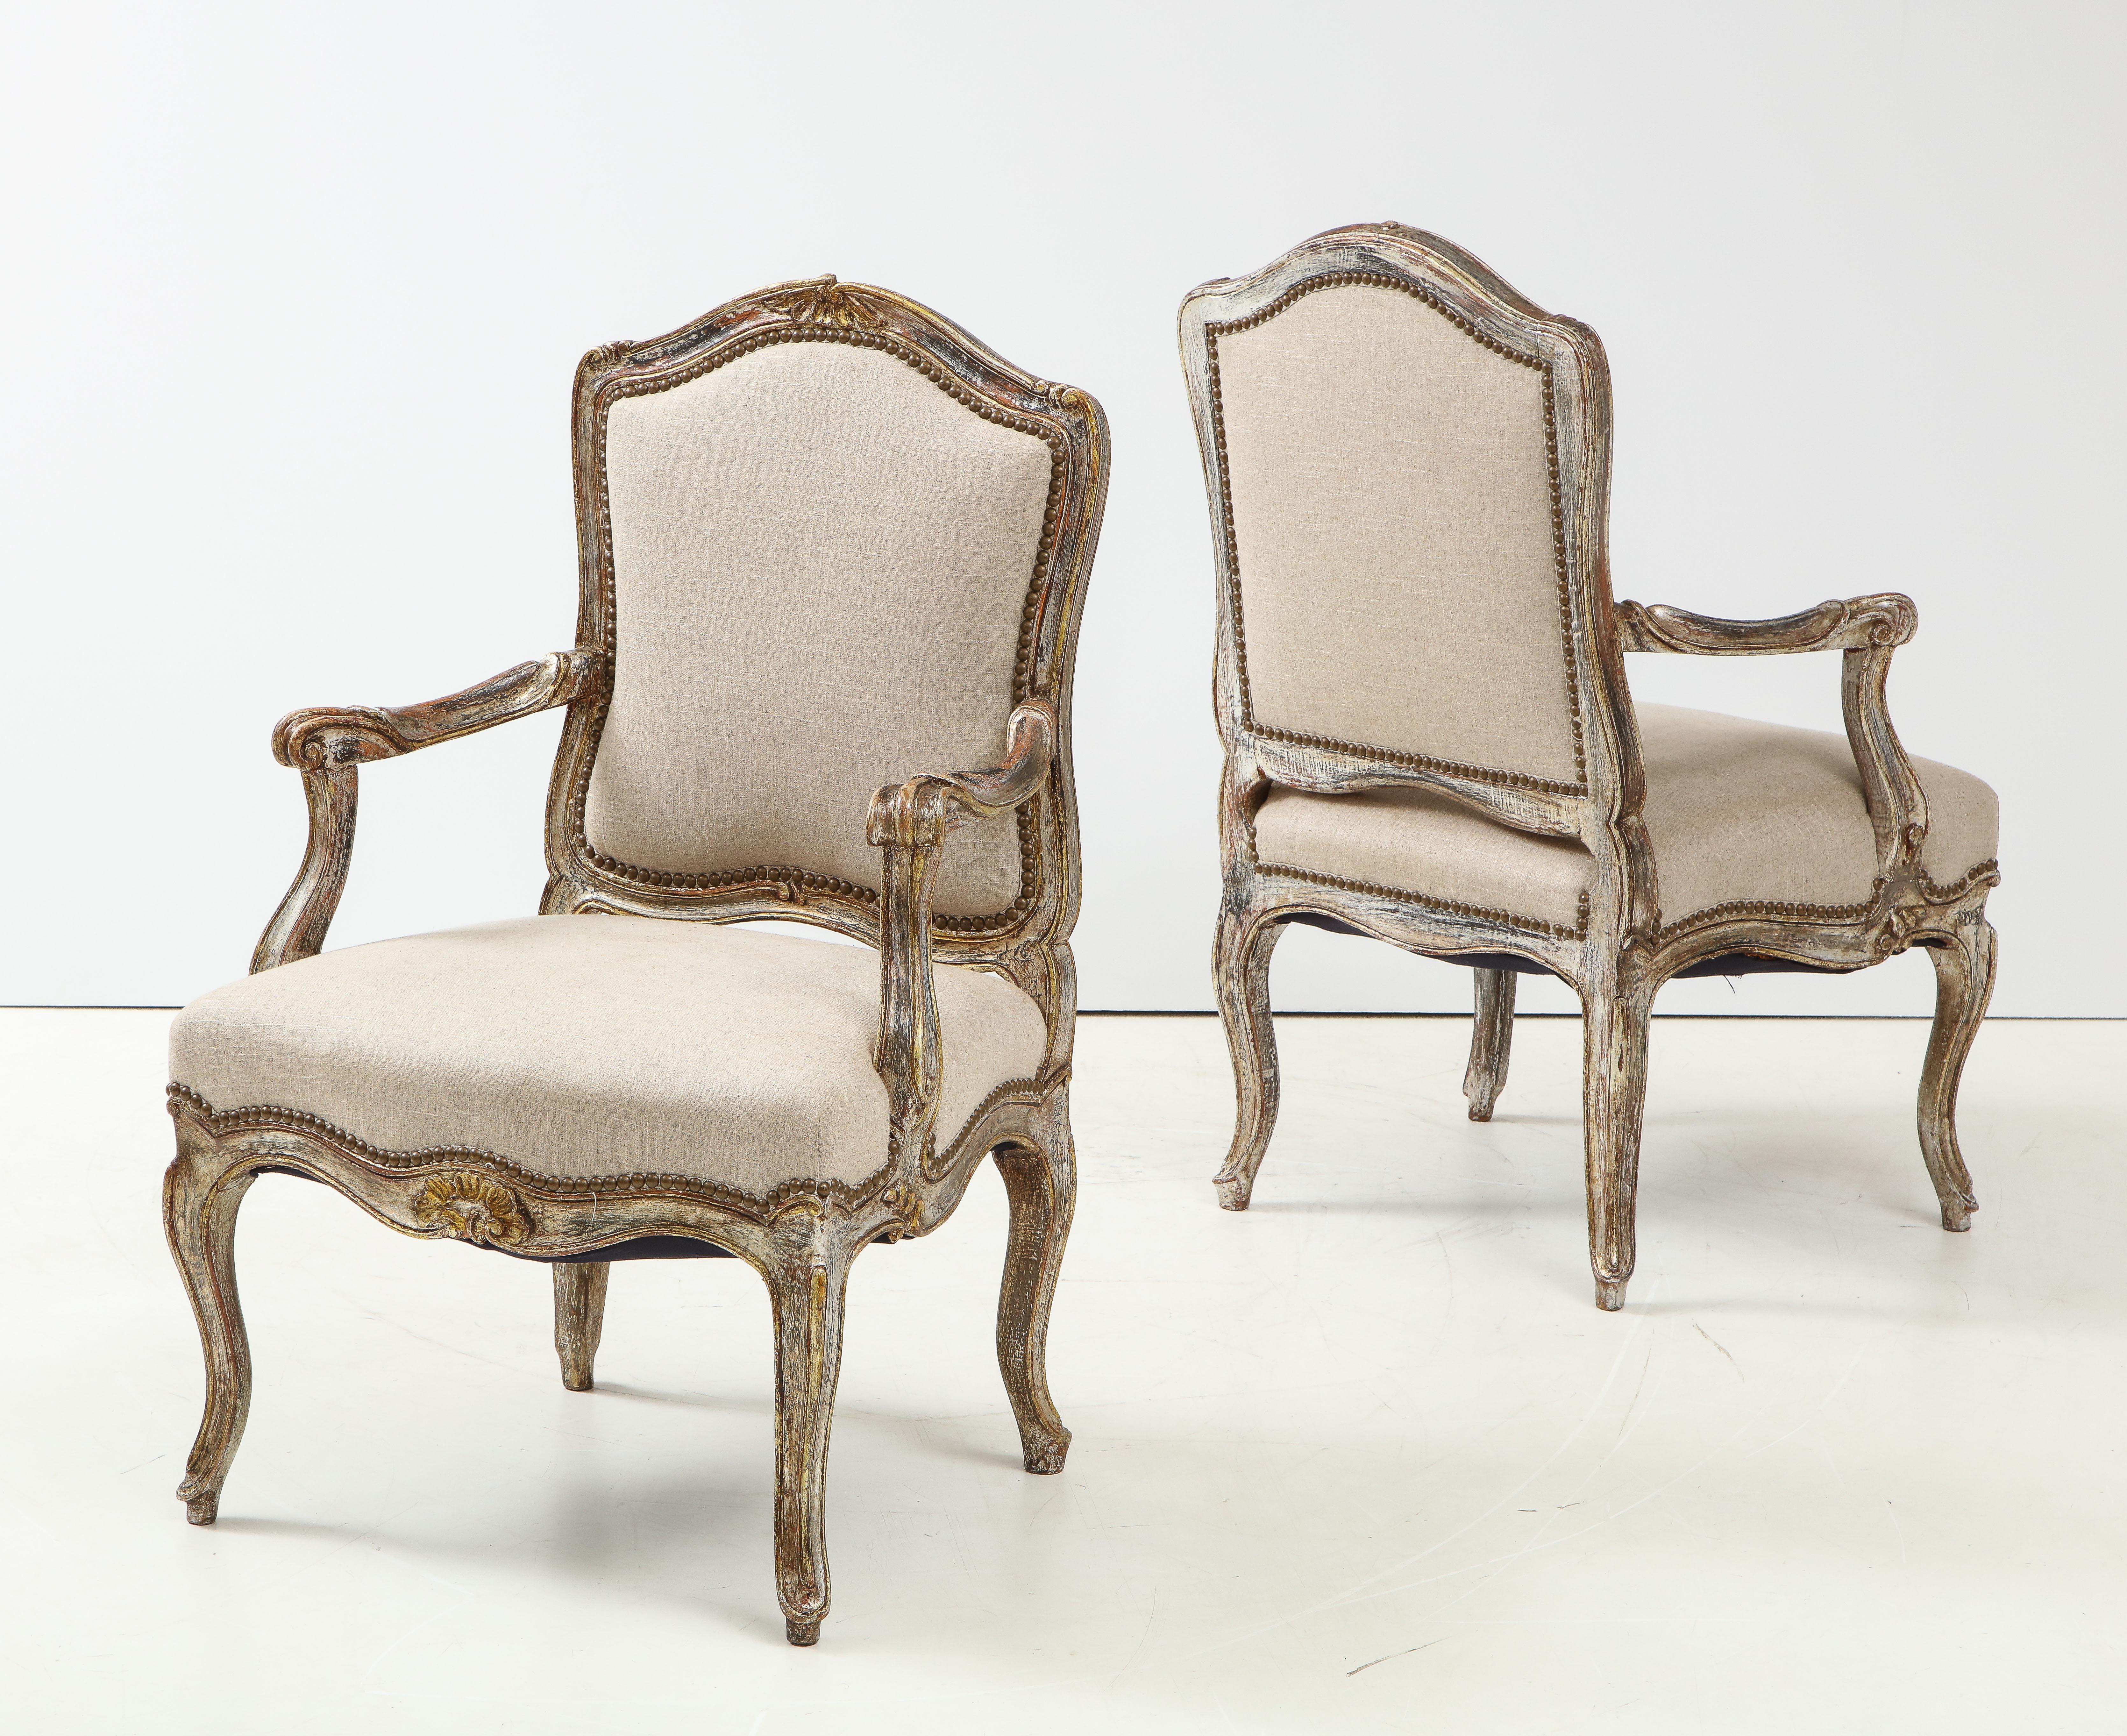 Pair of Italian Silver and Gilt Chairs 13